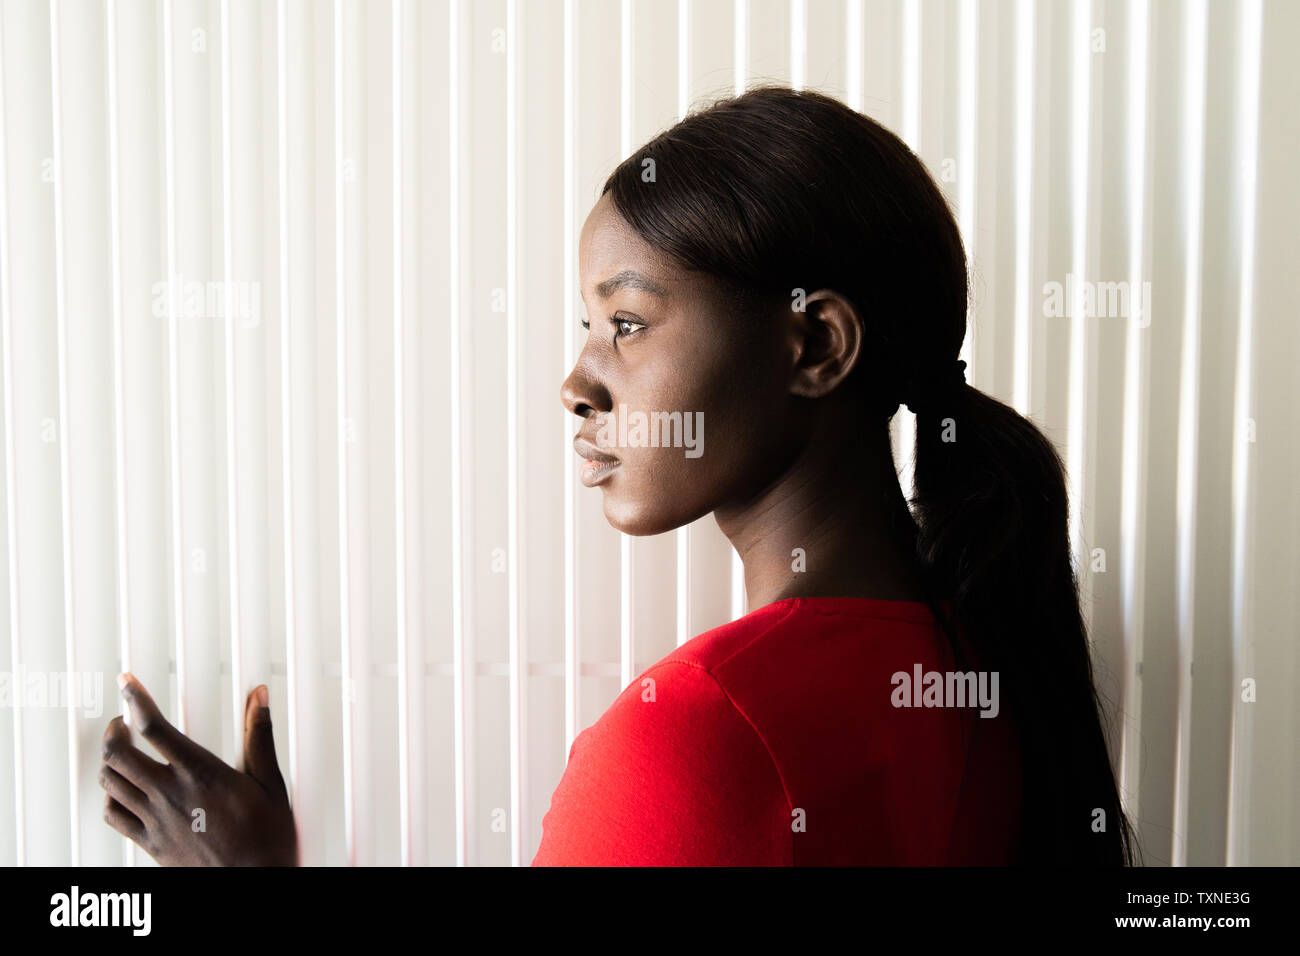 Young woman in red tshirt, head and shoulder profile portrait Stock Photo